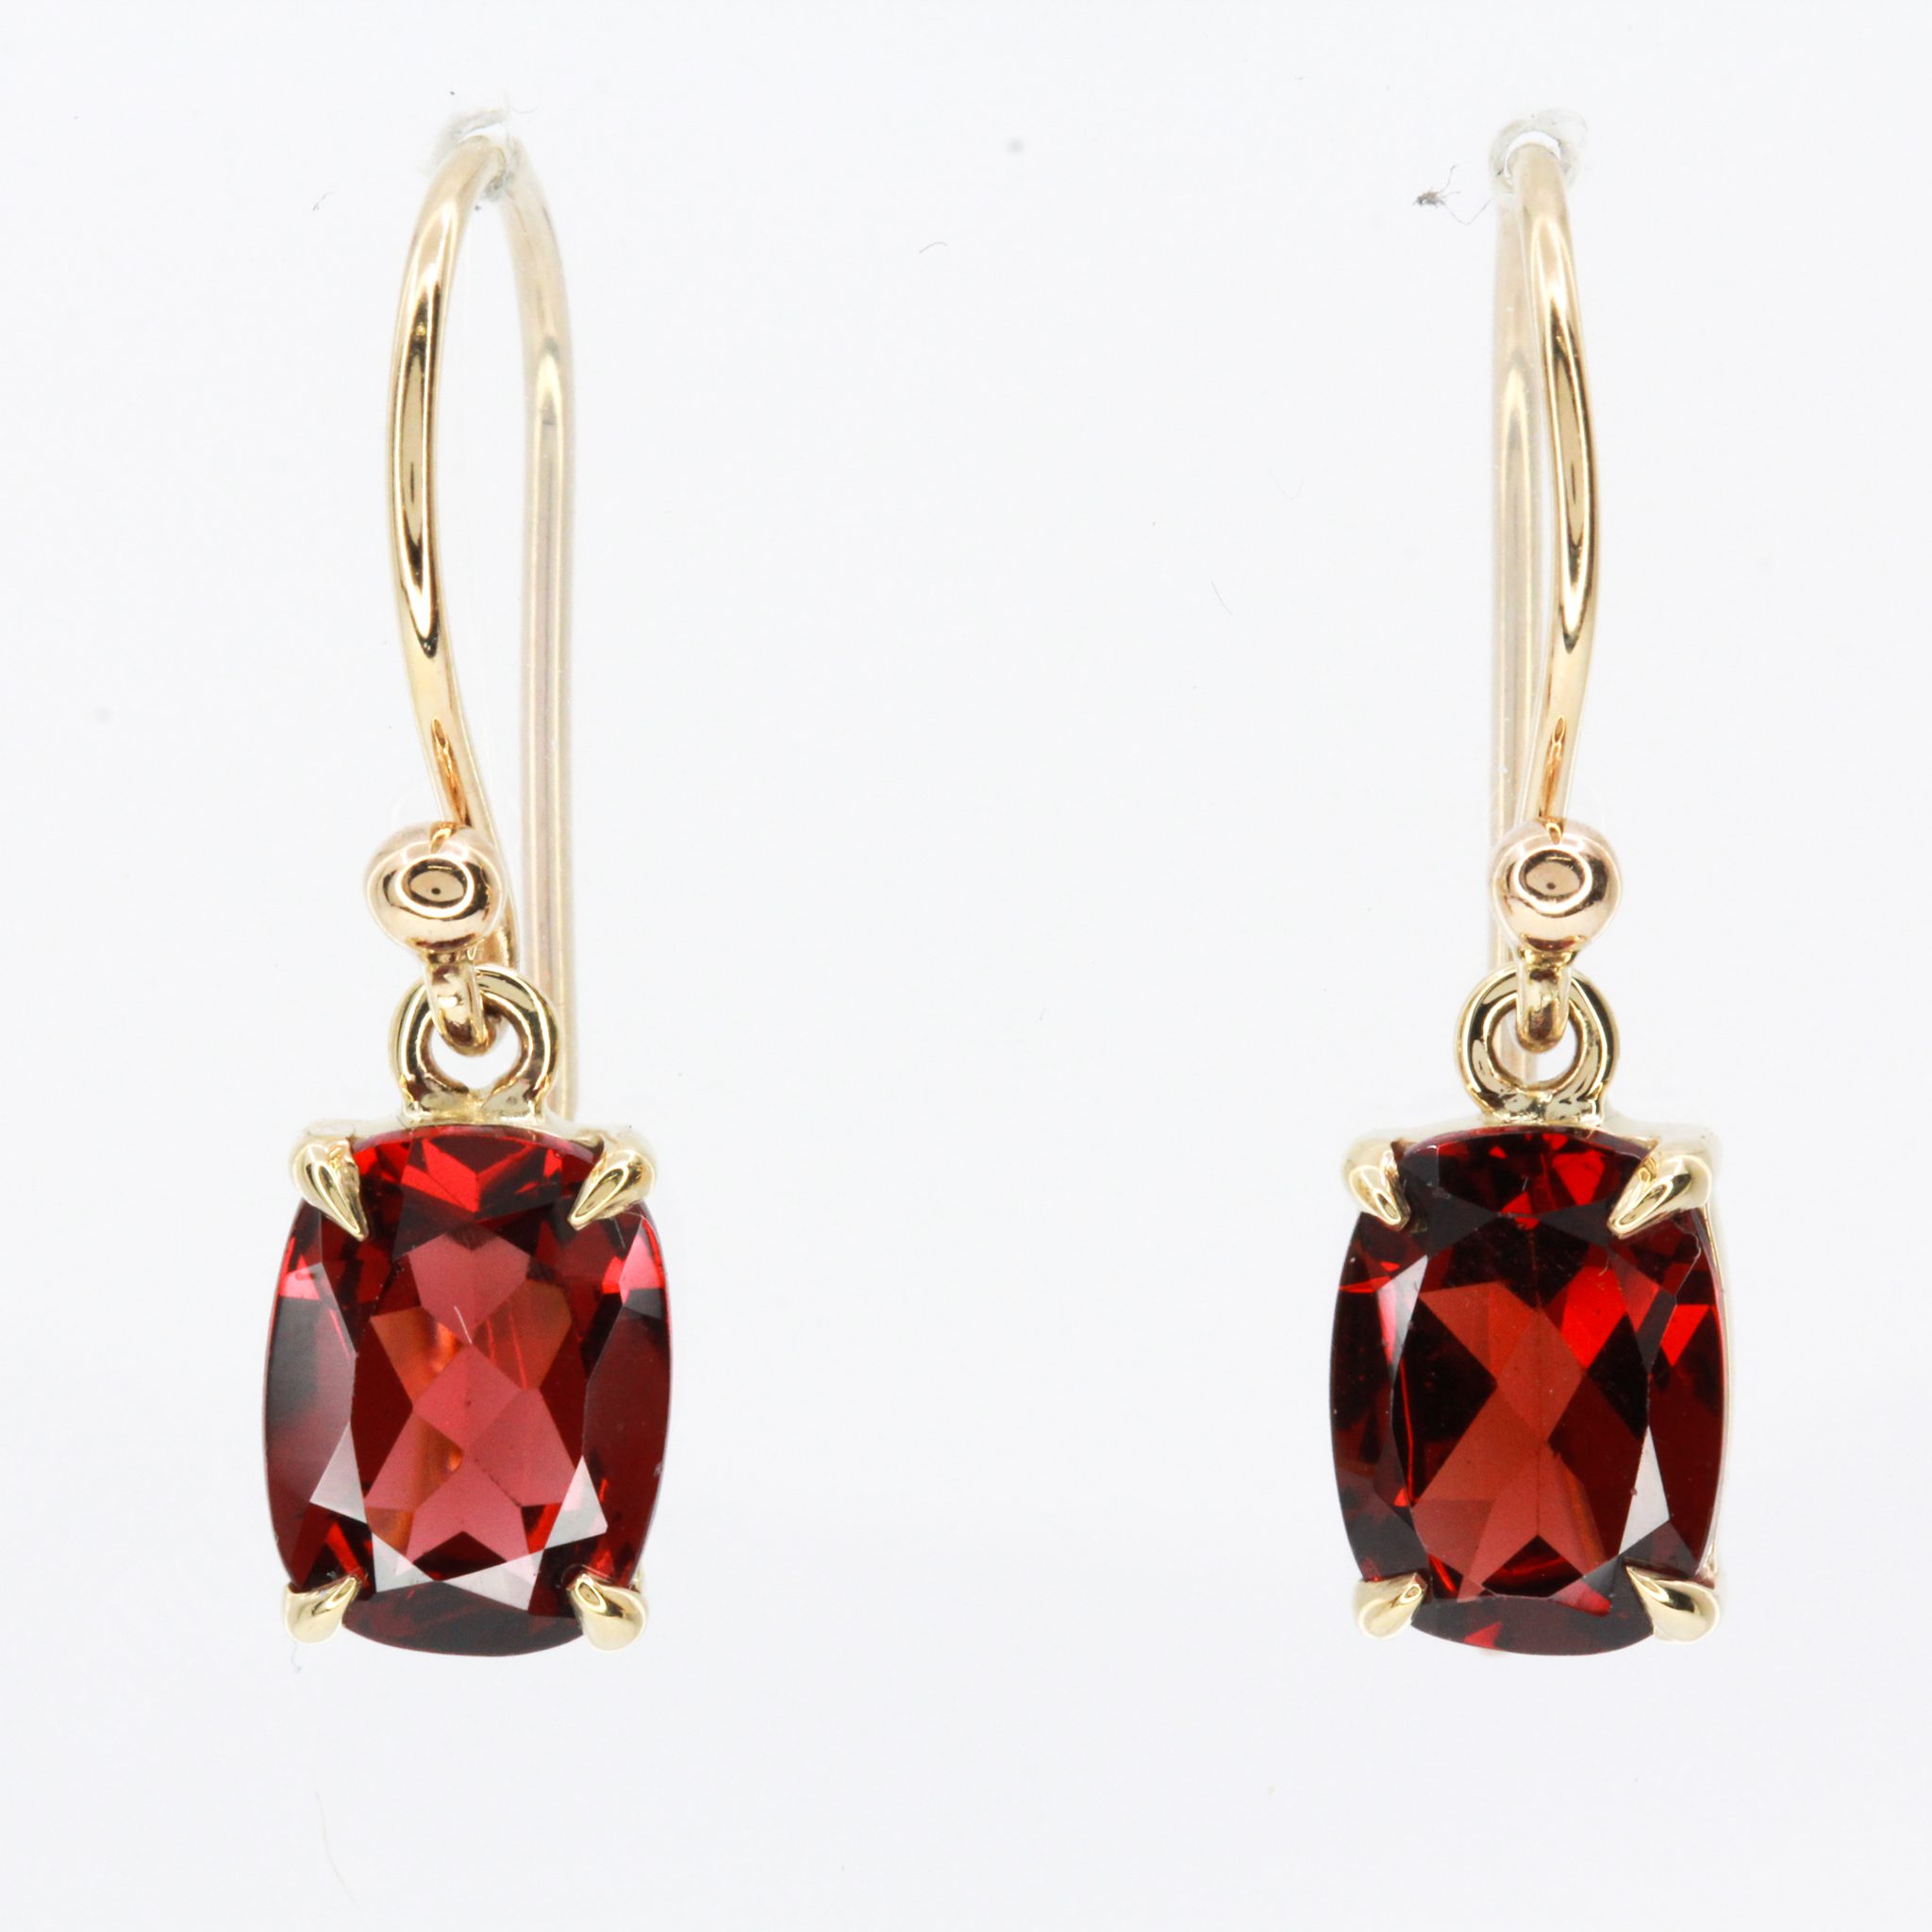 9ct Gold Garnet Earrings  6mm  G0451  FHinds Jewellers